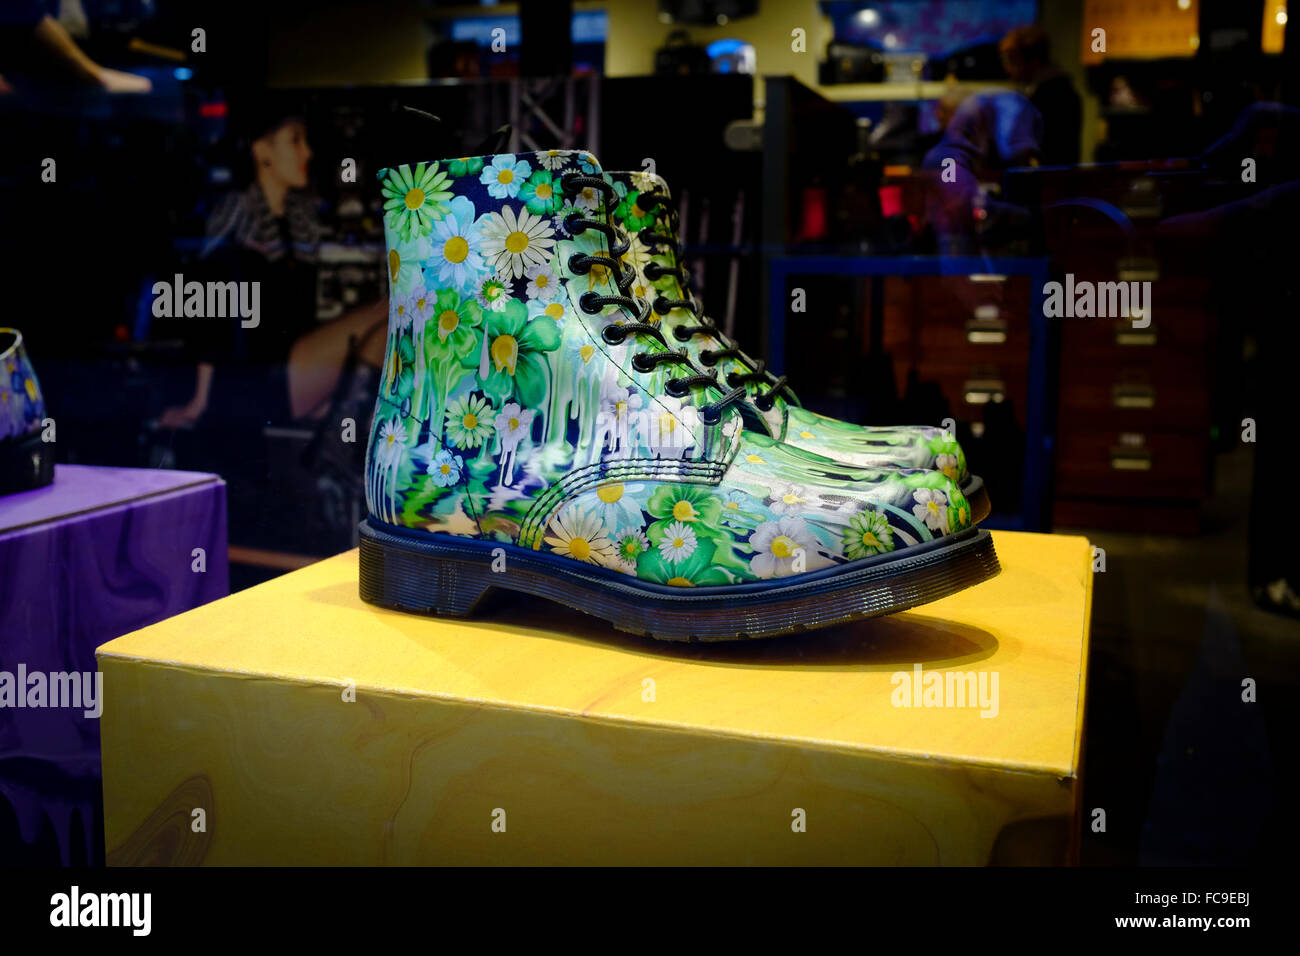 Dr Martens floral design boots on display at Dr Martens shop, Neal street, Covent Garden, London.UK. Stock Photo